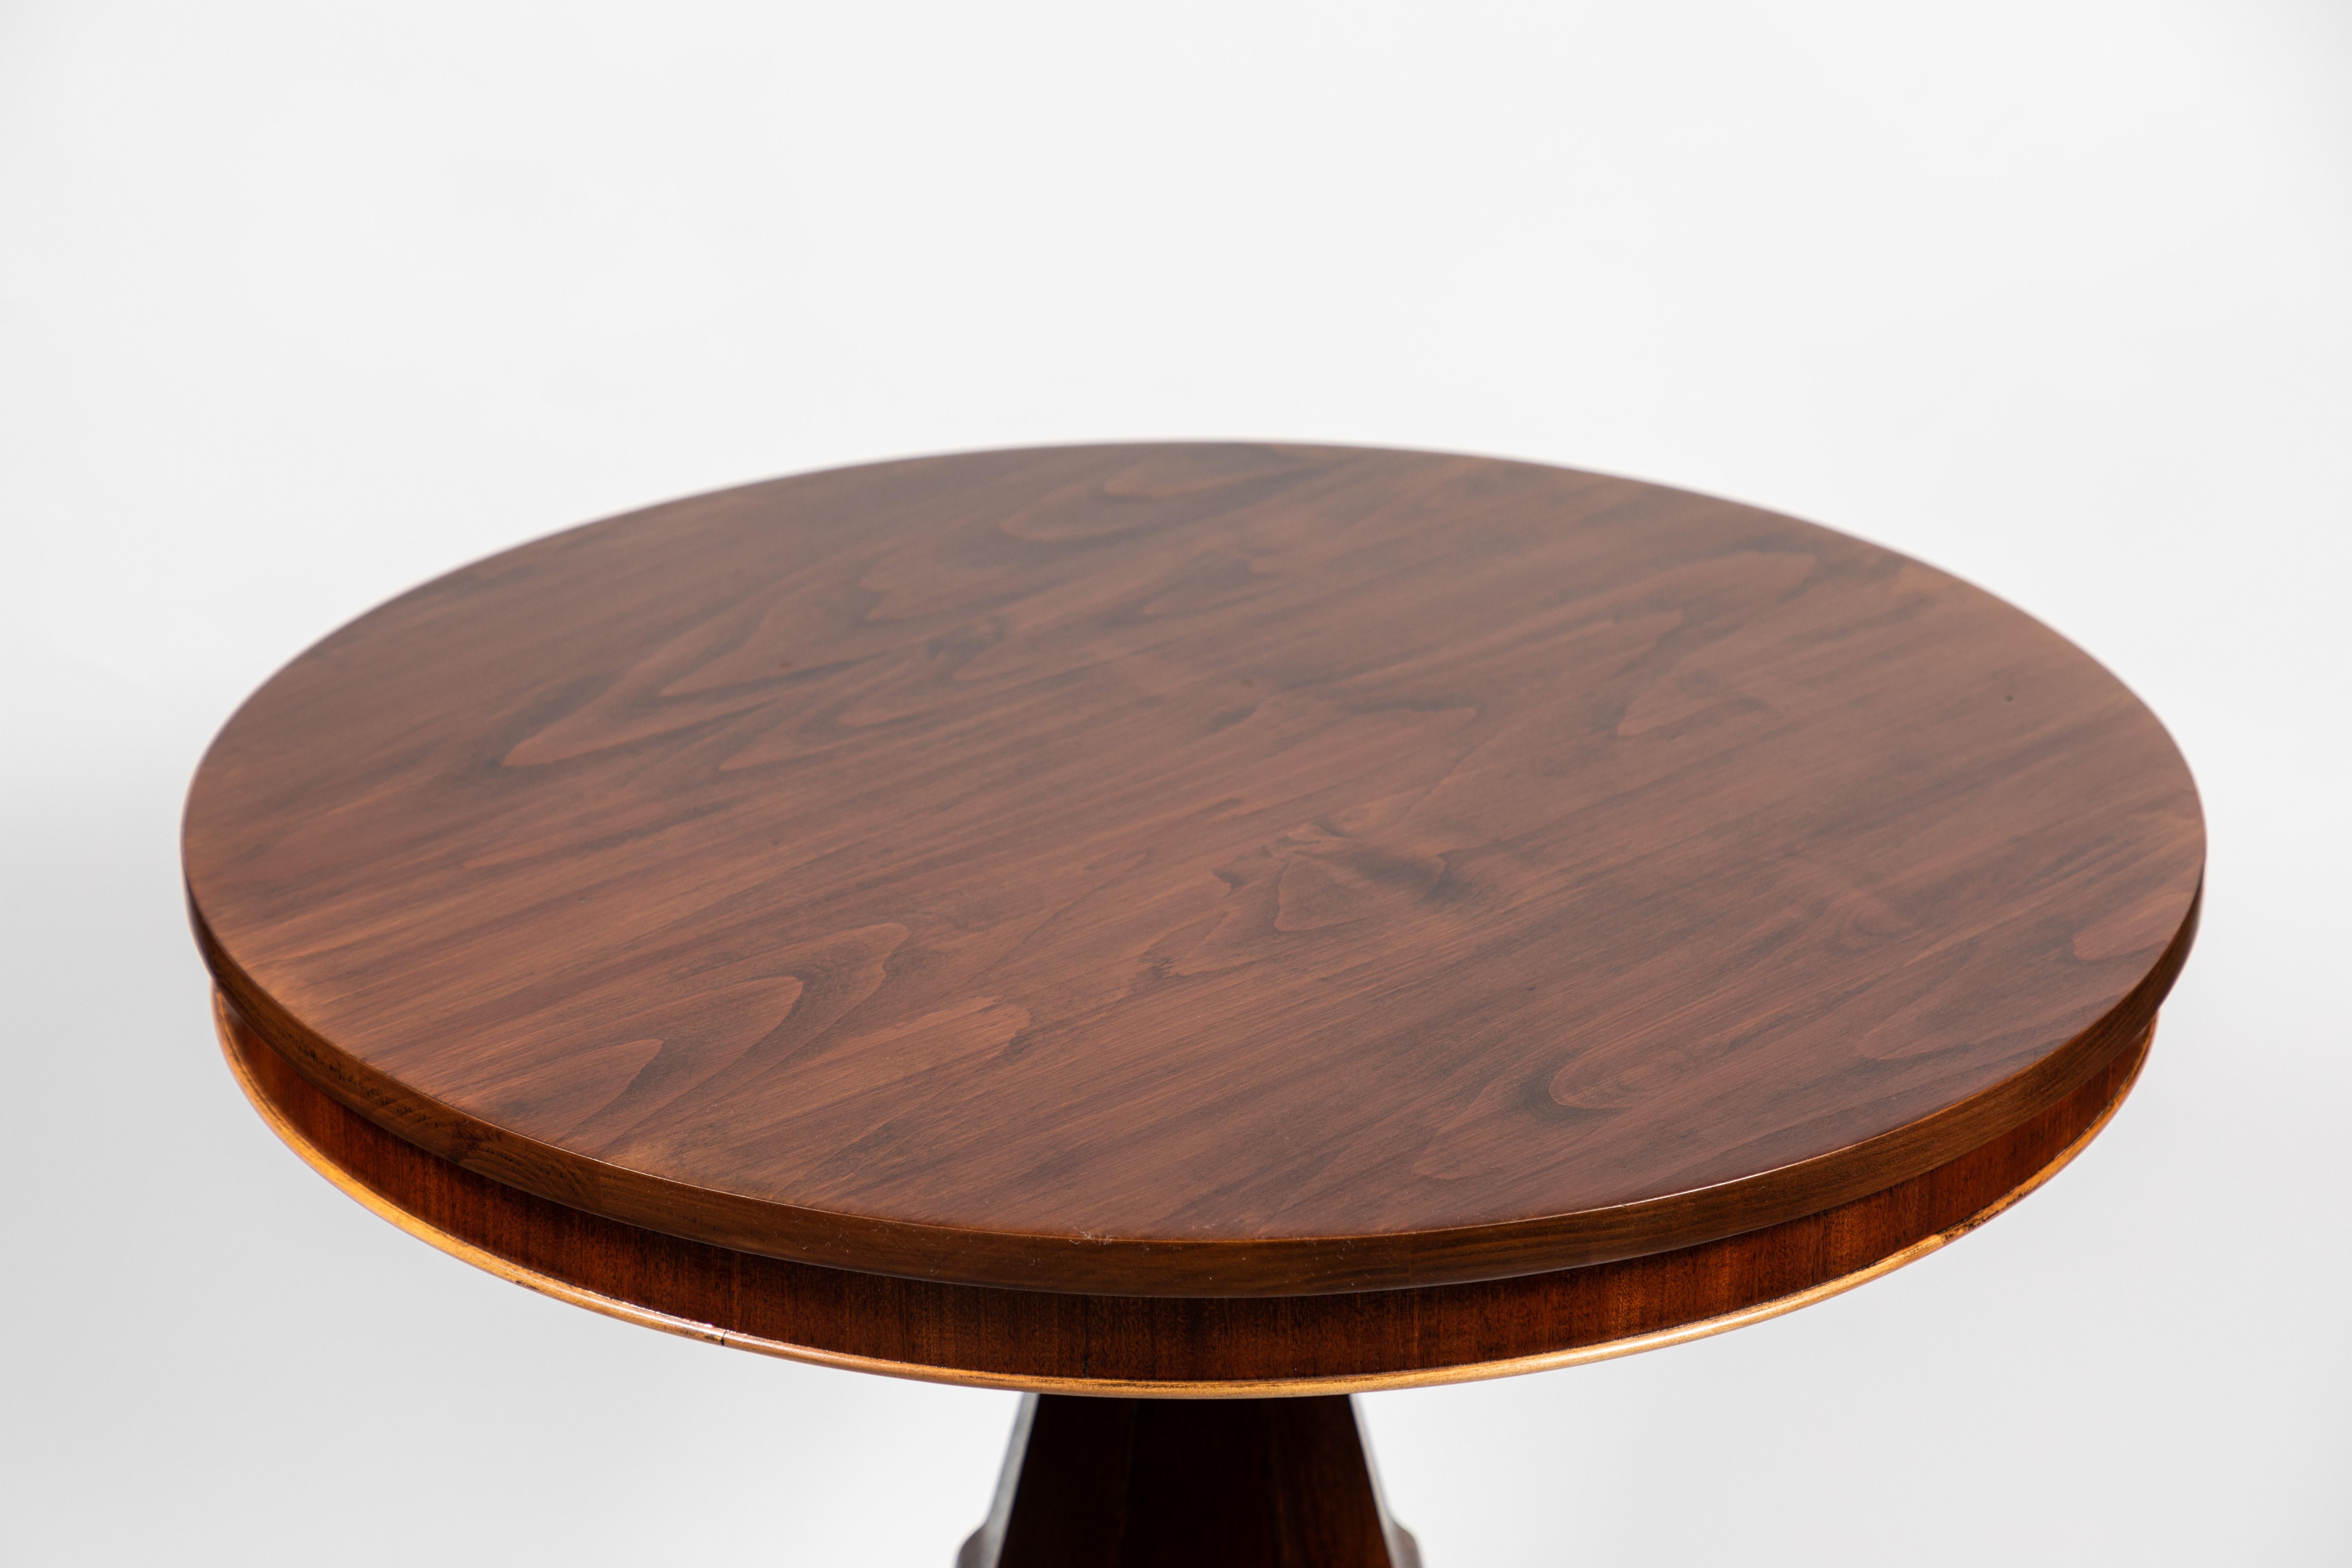 Mahogany round pedestal side table, decorative pedestal base and scroll feet with castors, circa 1850
newly refinished.